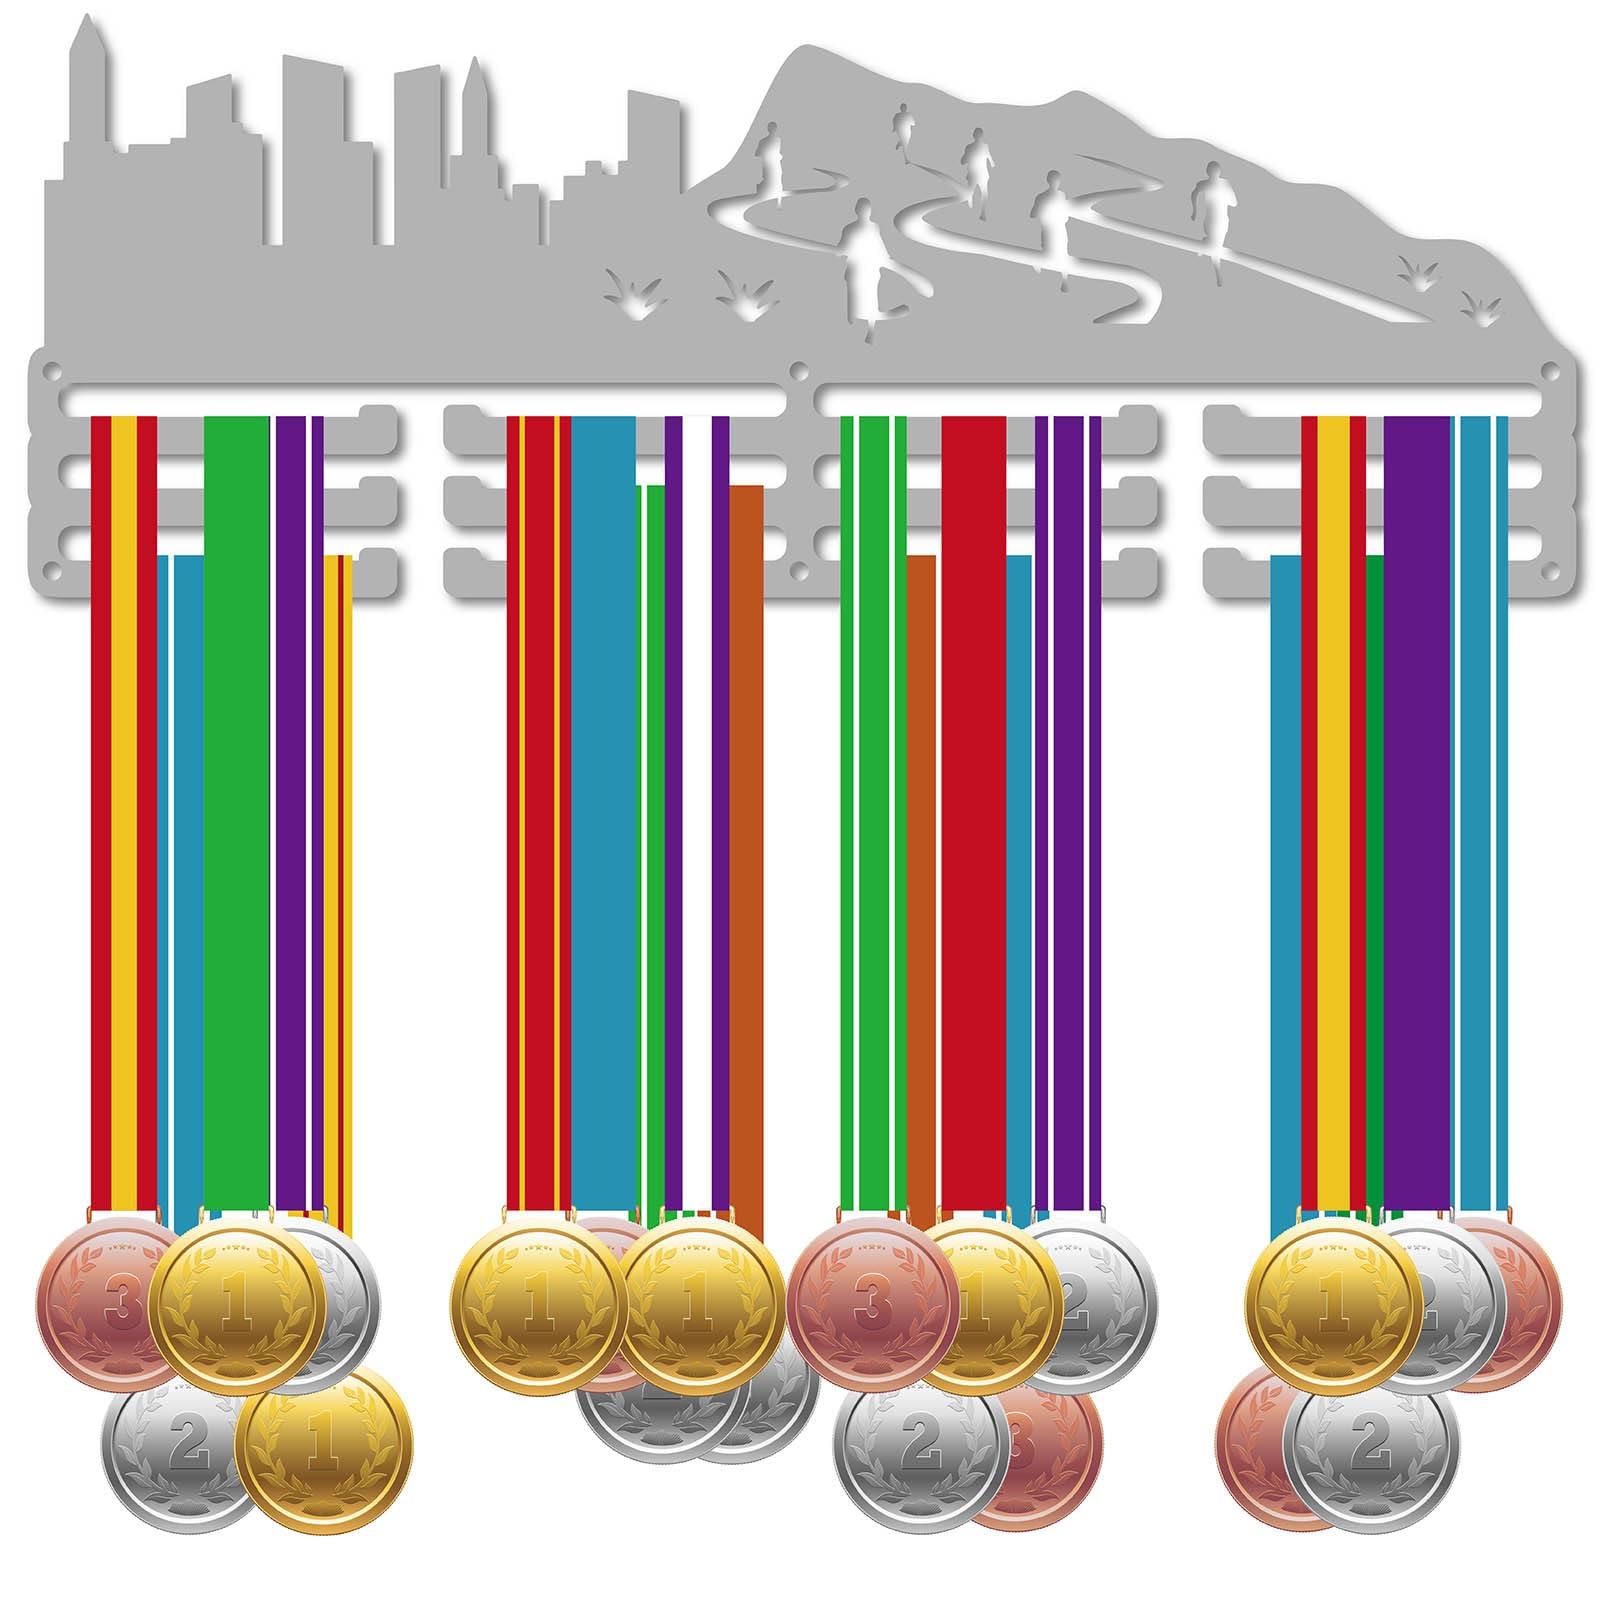 CREATCABIN Running City Medal Holder Hanger Silvery Metal Iron Medal Rack Organizer Medal Stand Frame with 12 Hooks 3 Rows Hanging Over 60 Medals Wall Mounted Hanger for Marathon Runner 15.7 x 6Inch